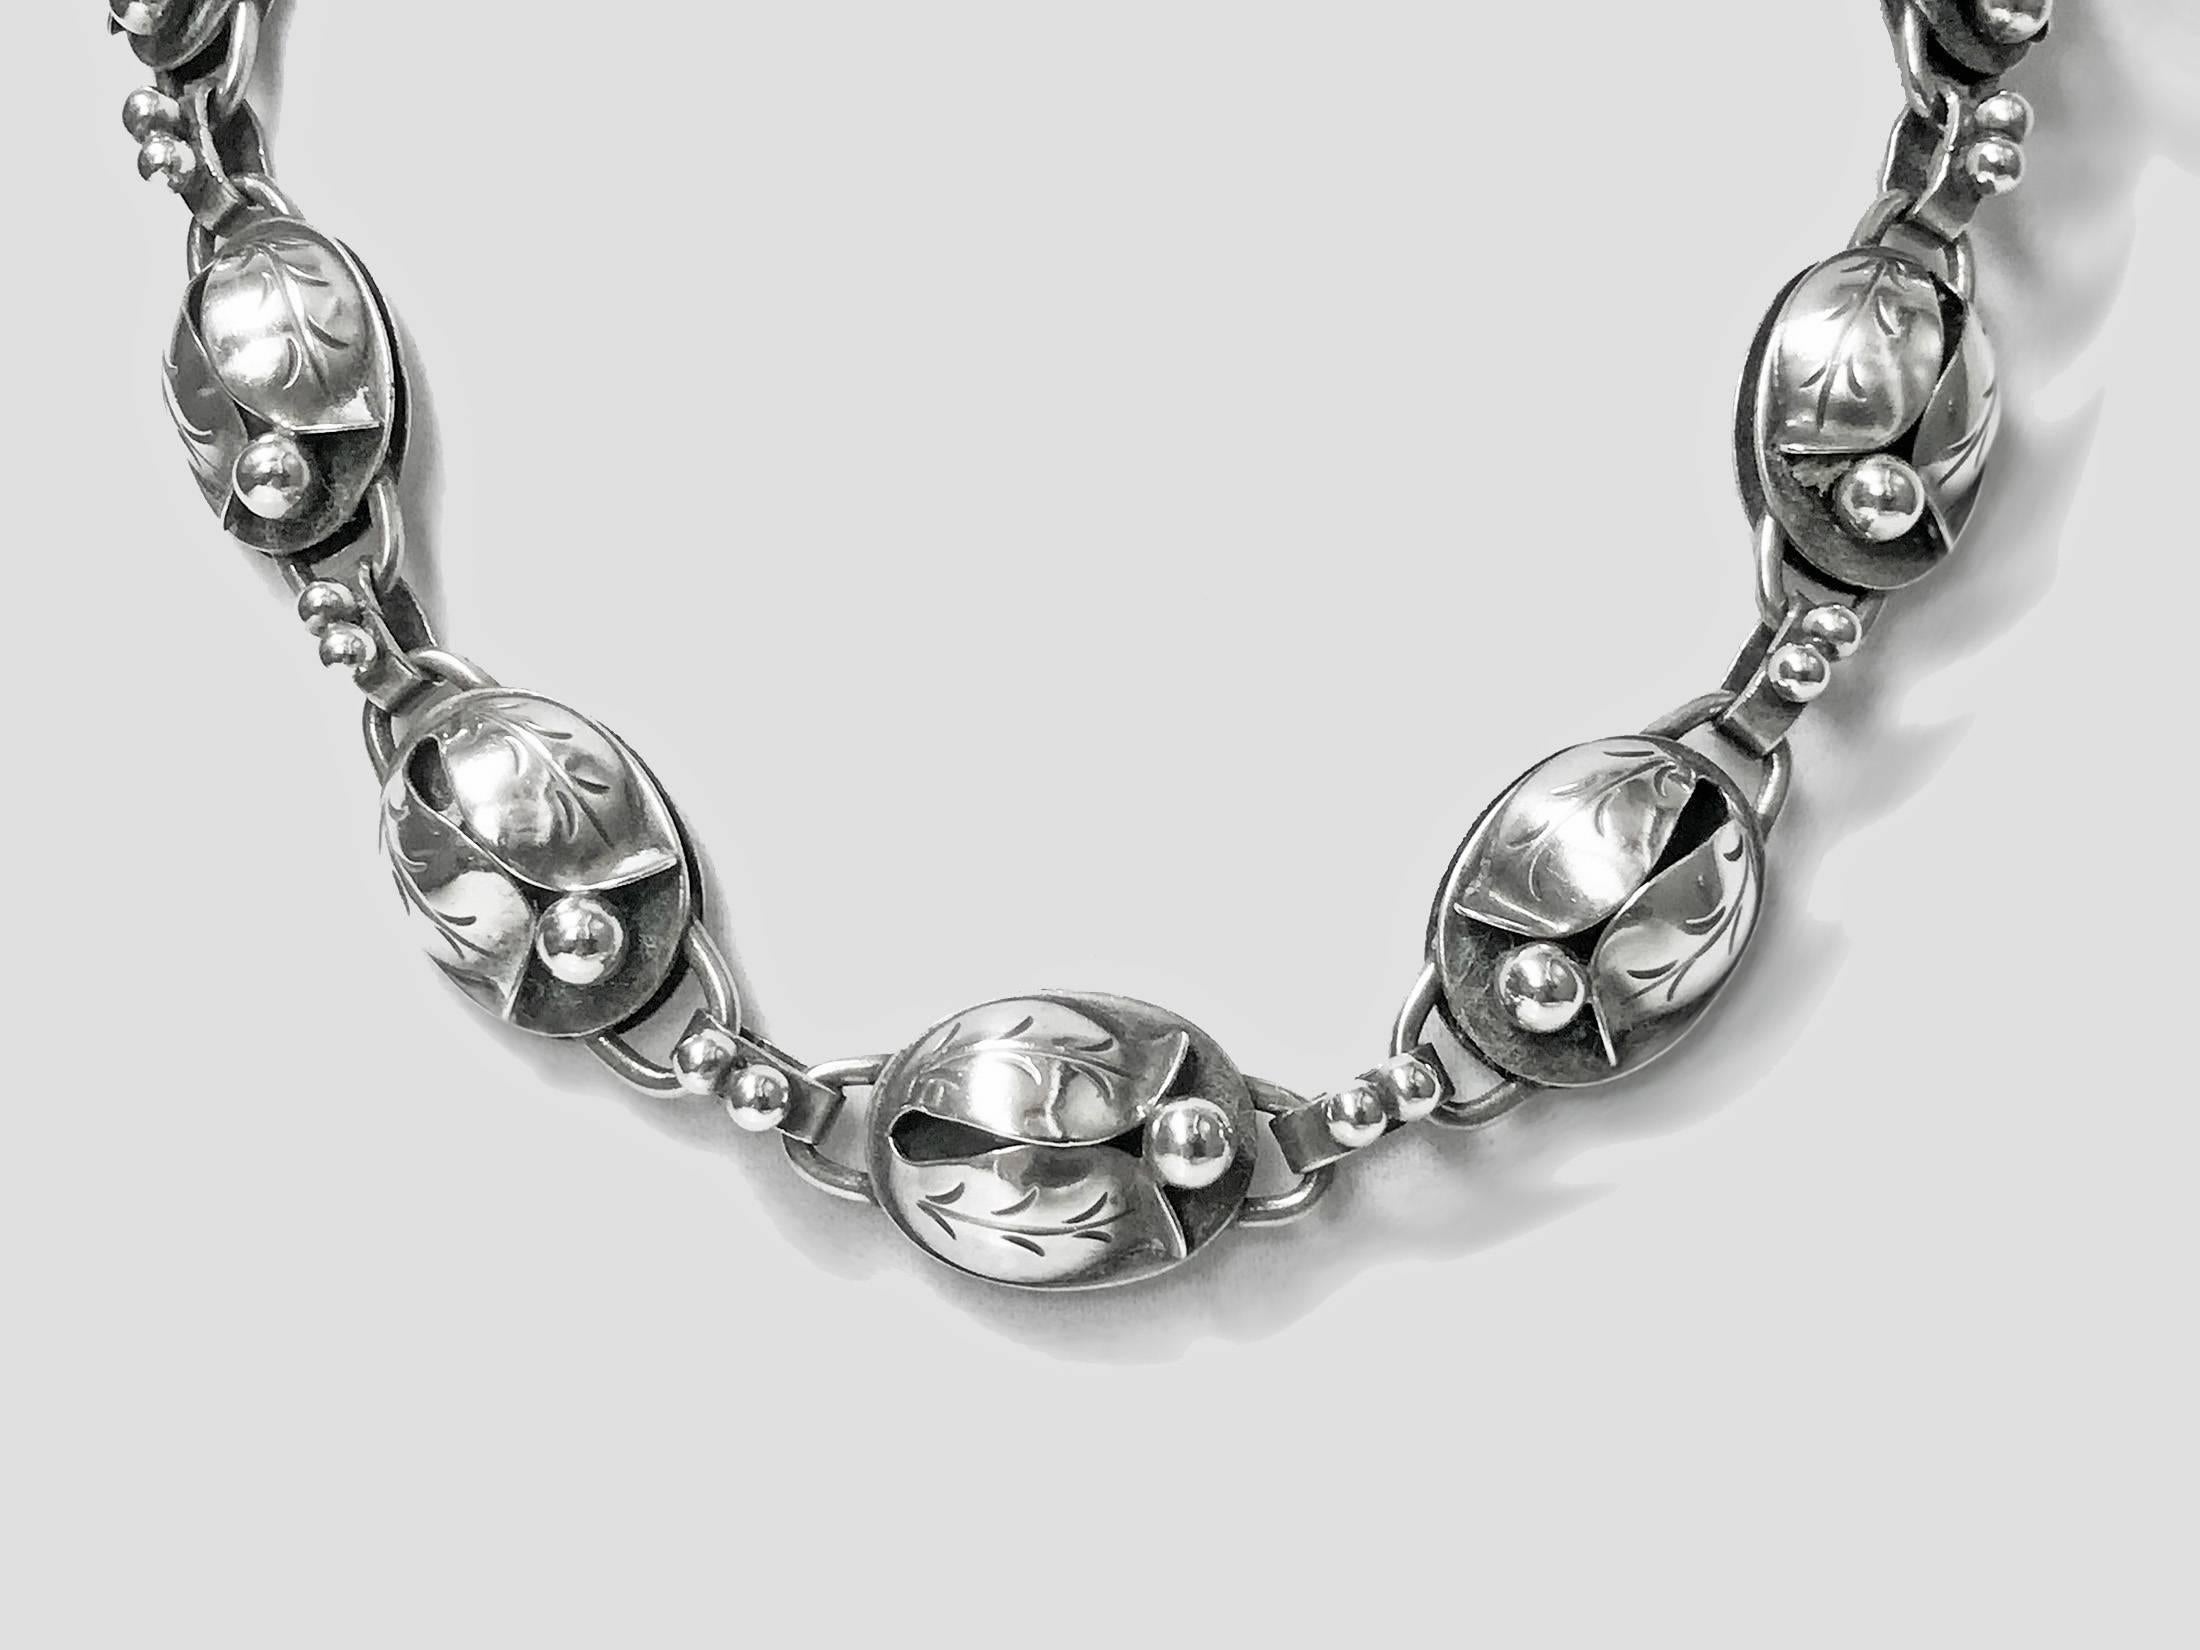 Georg Jensen Sterling matching Necklace and Bracelet, C.1940.The Necklace and Bracelet, convertible to longer necklace, with hinged open stylised bud blossom links, plain polished bud links between, Georg Jensen hand wrought Sterling USA marks to